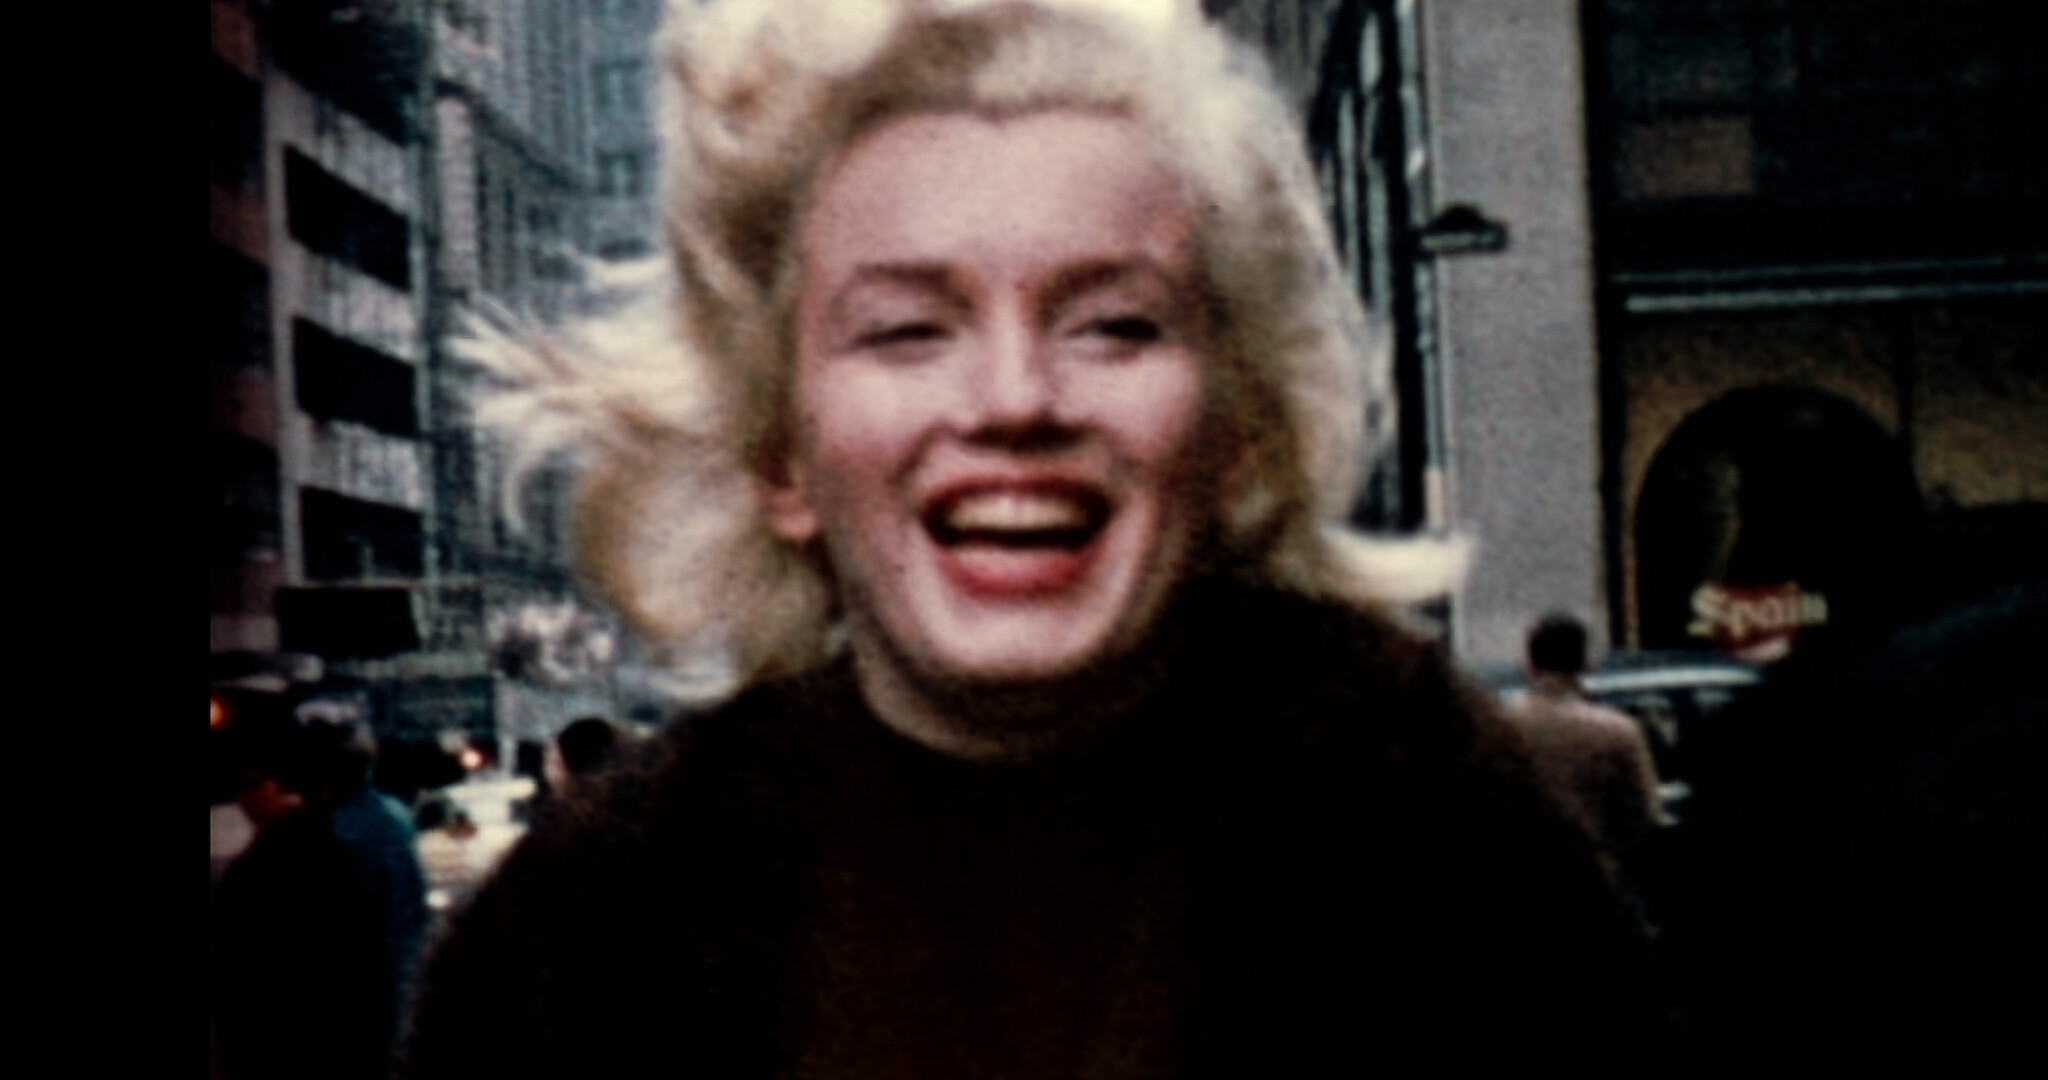 New Collection Pieces Added - The Marilyn Monroe Collection